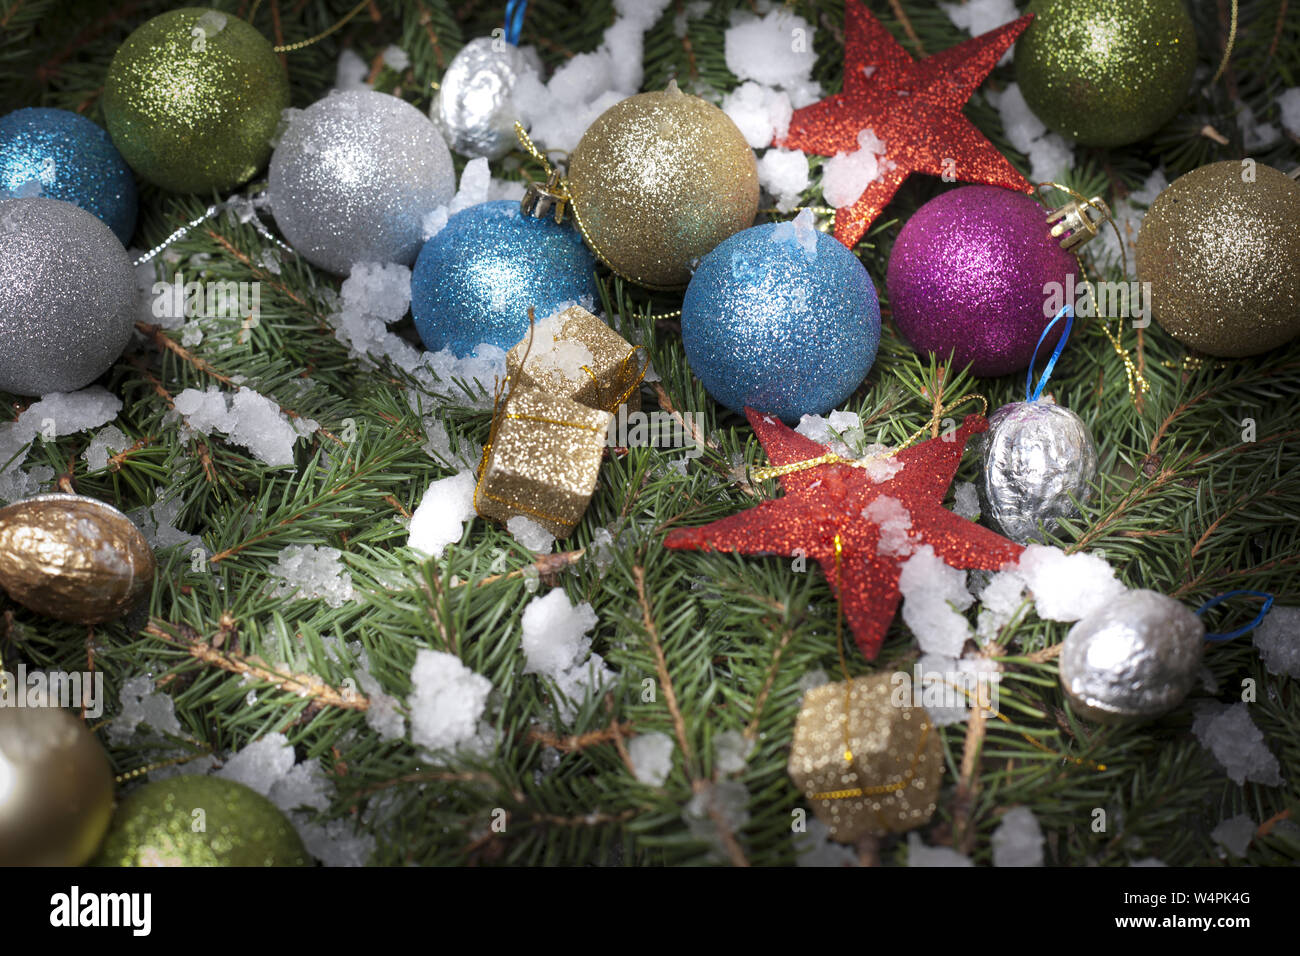 Christmas decoration ball and gift on tree needles with ice Stock Photo